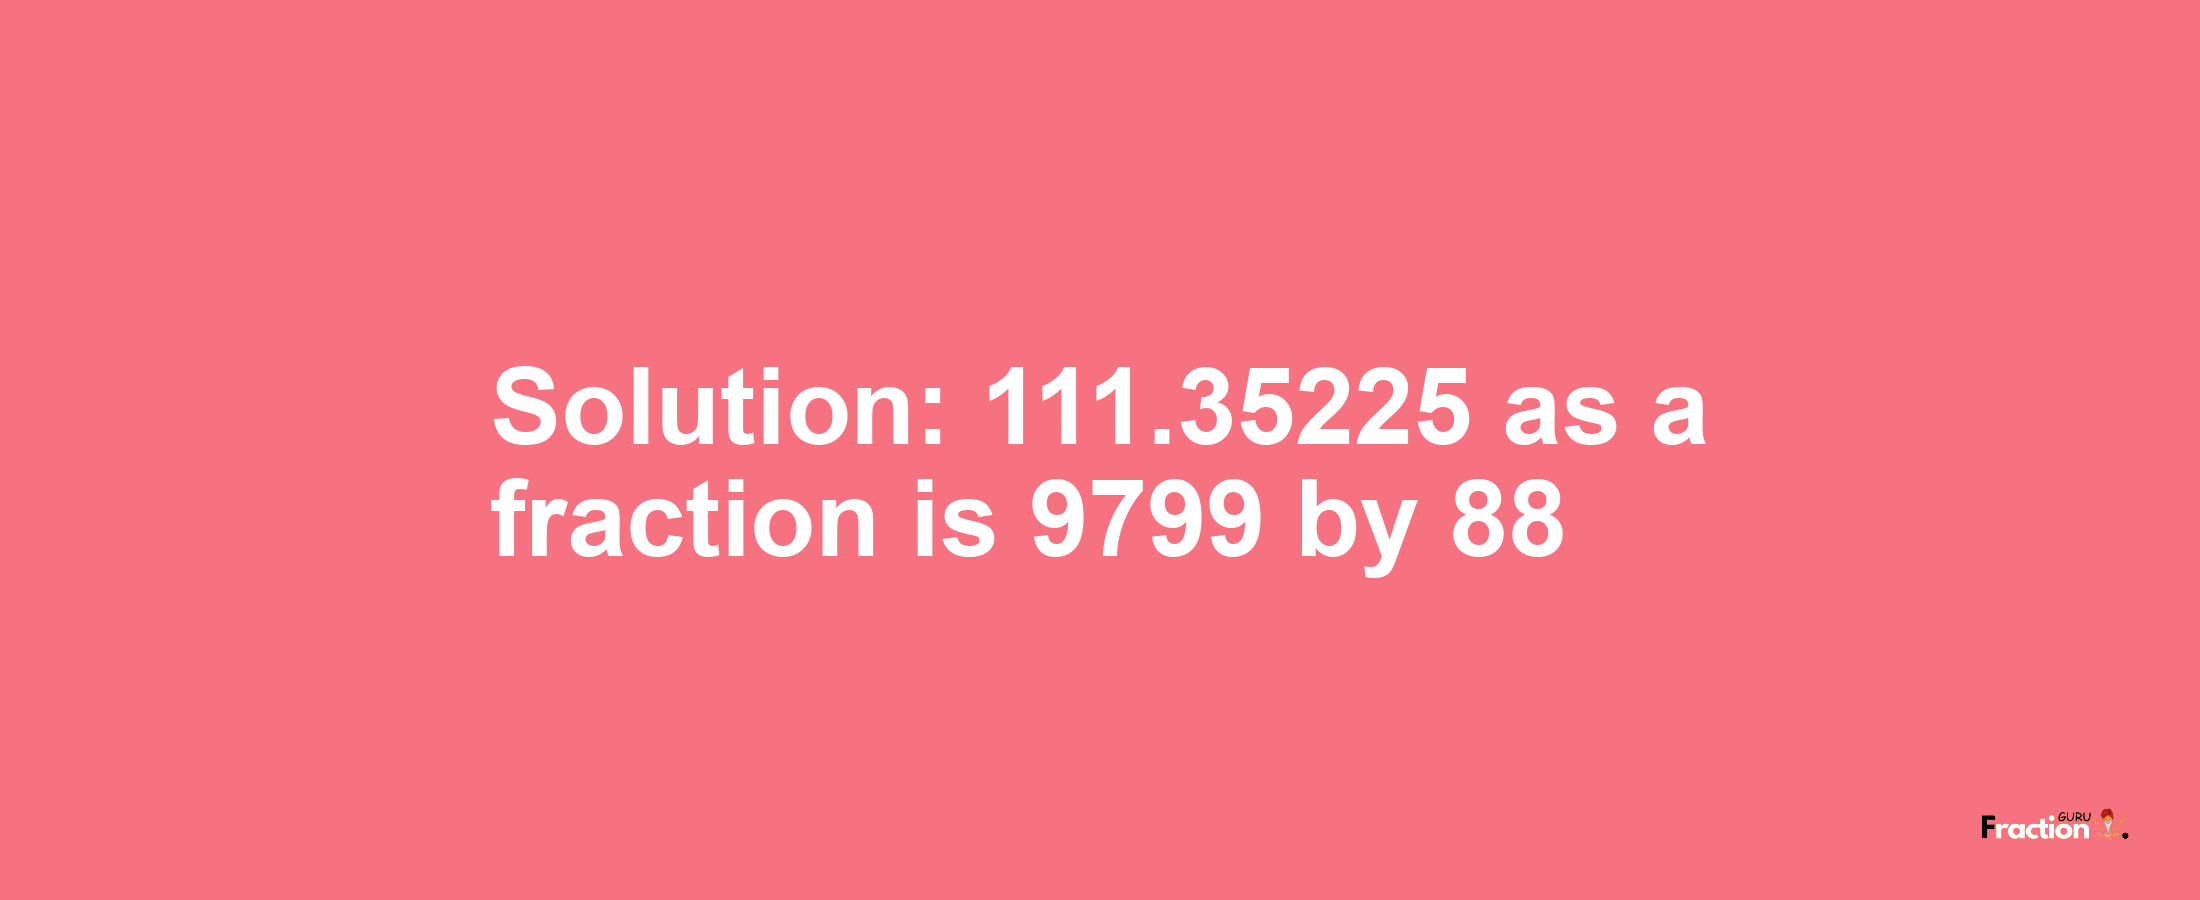 Solution:111.35225 as a fraction is 9799/88